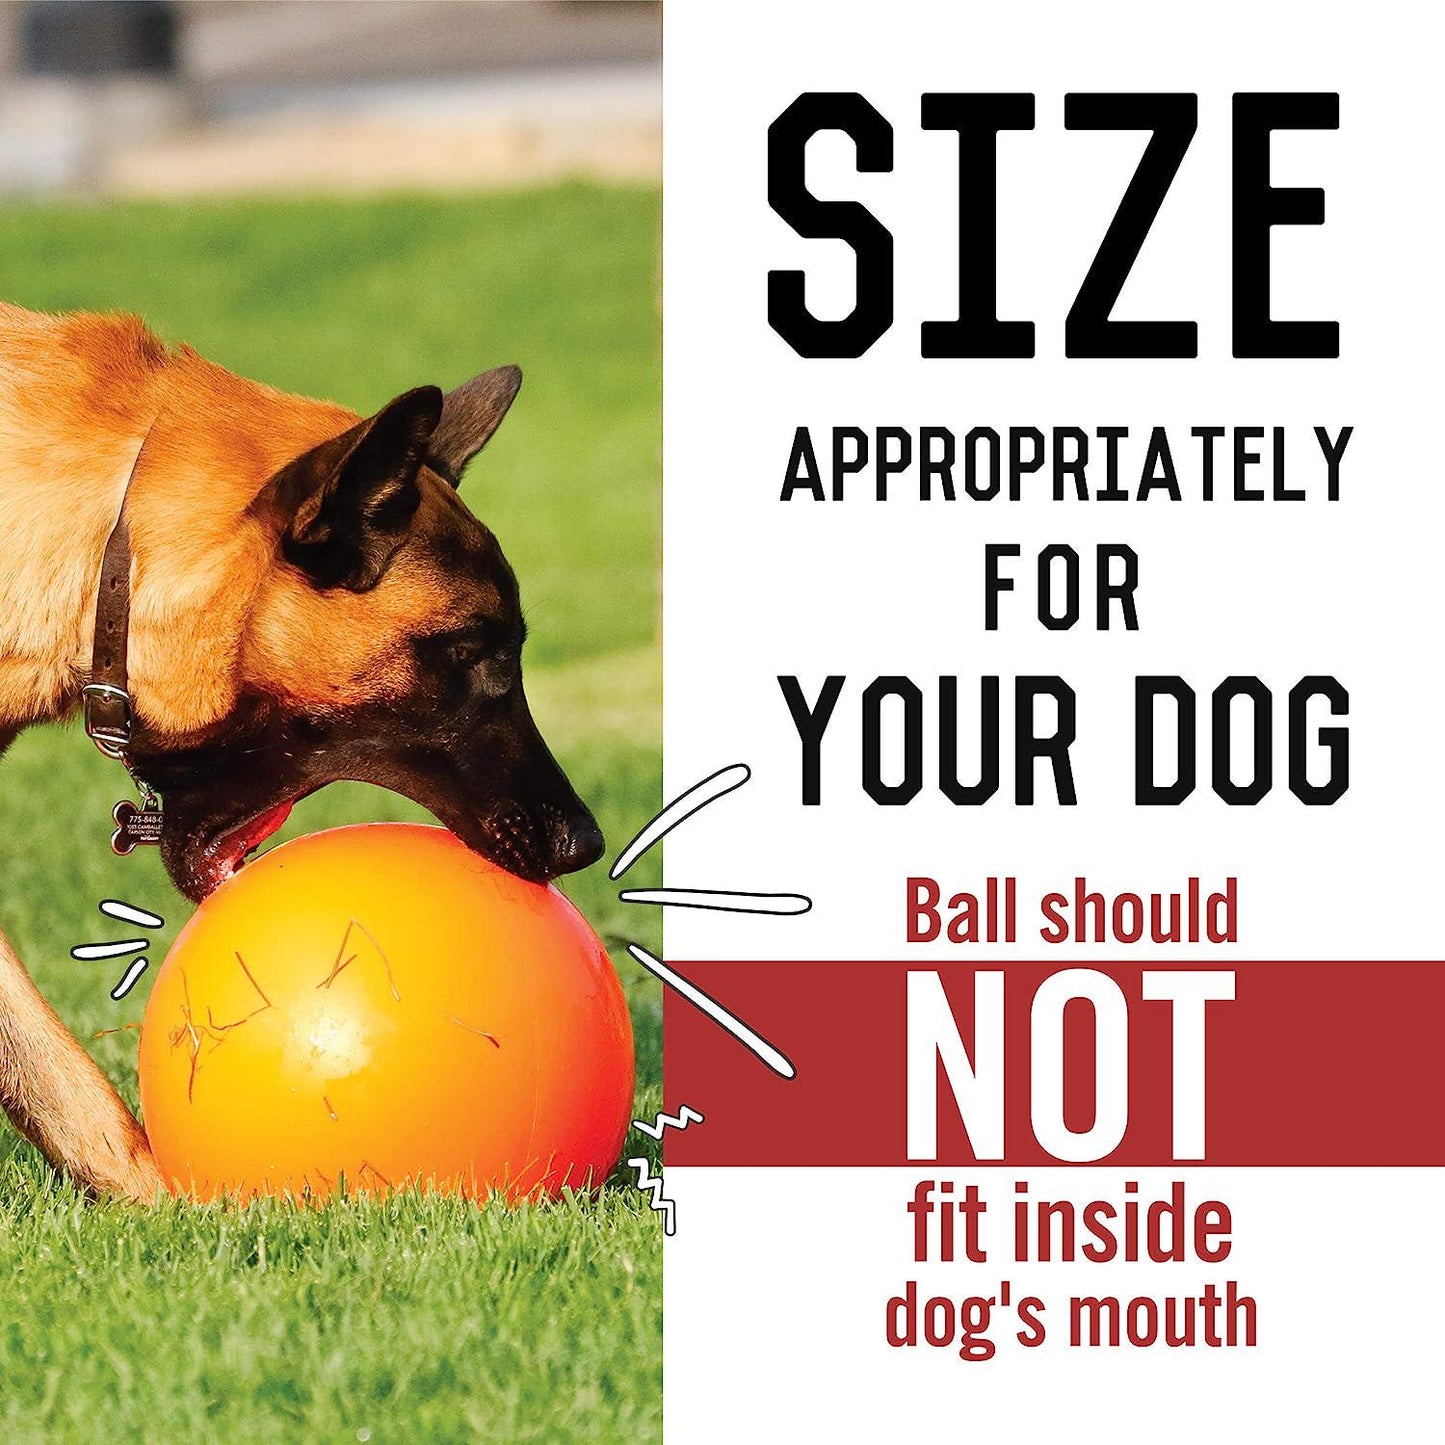 B00CIT99BC Virtually Indestructible Best Ball (hard plastic, colors may vary), All Breed Sizes